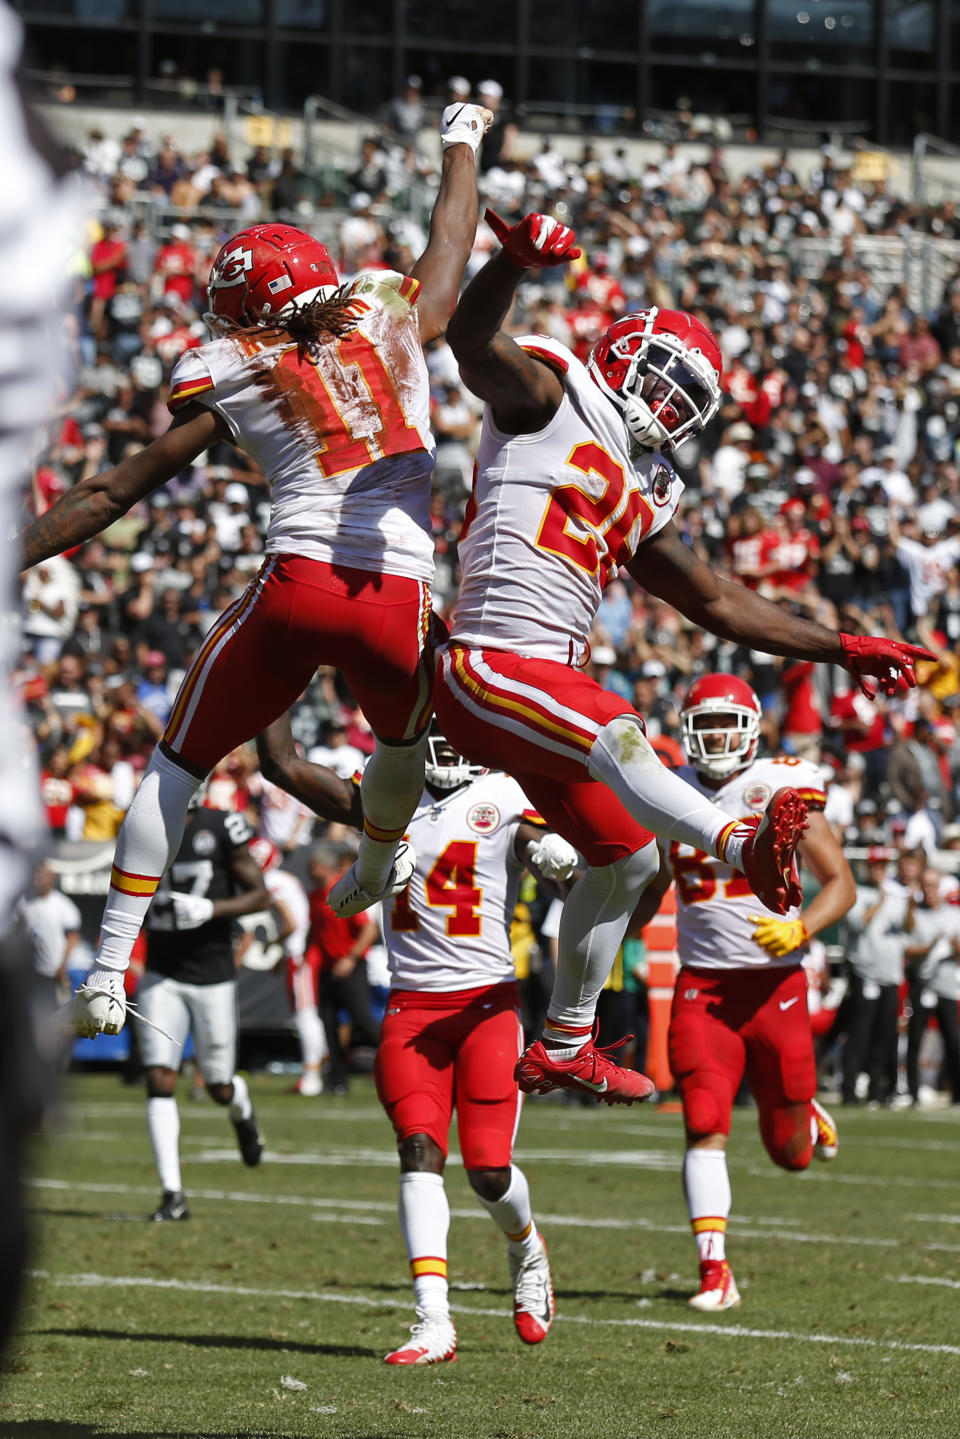 Kansas City Chiefs wide receiver Demarcus Robinson (11) is greeted by running back Damien Williams, right, after scoring a touchdown during the first half of an NFL football game against the Oakland Raiders Sunday, Sept. 15, 2019, in Oakland, Calif. (AP Photo/D. Ross Cameron)